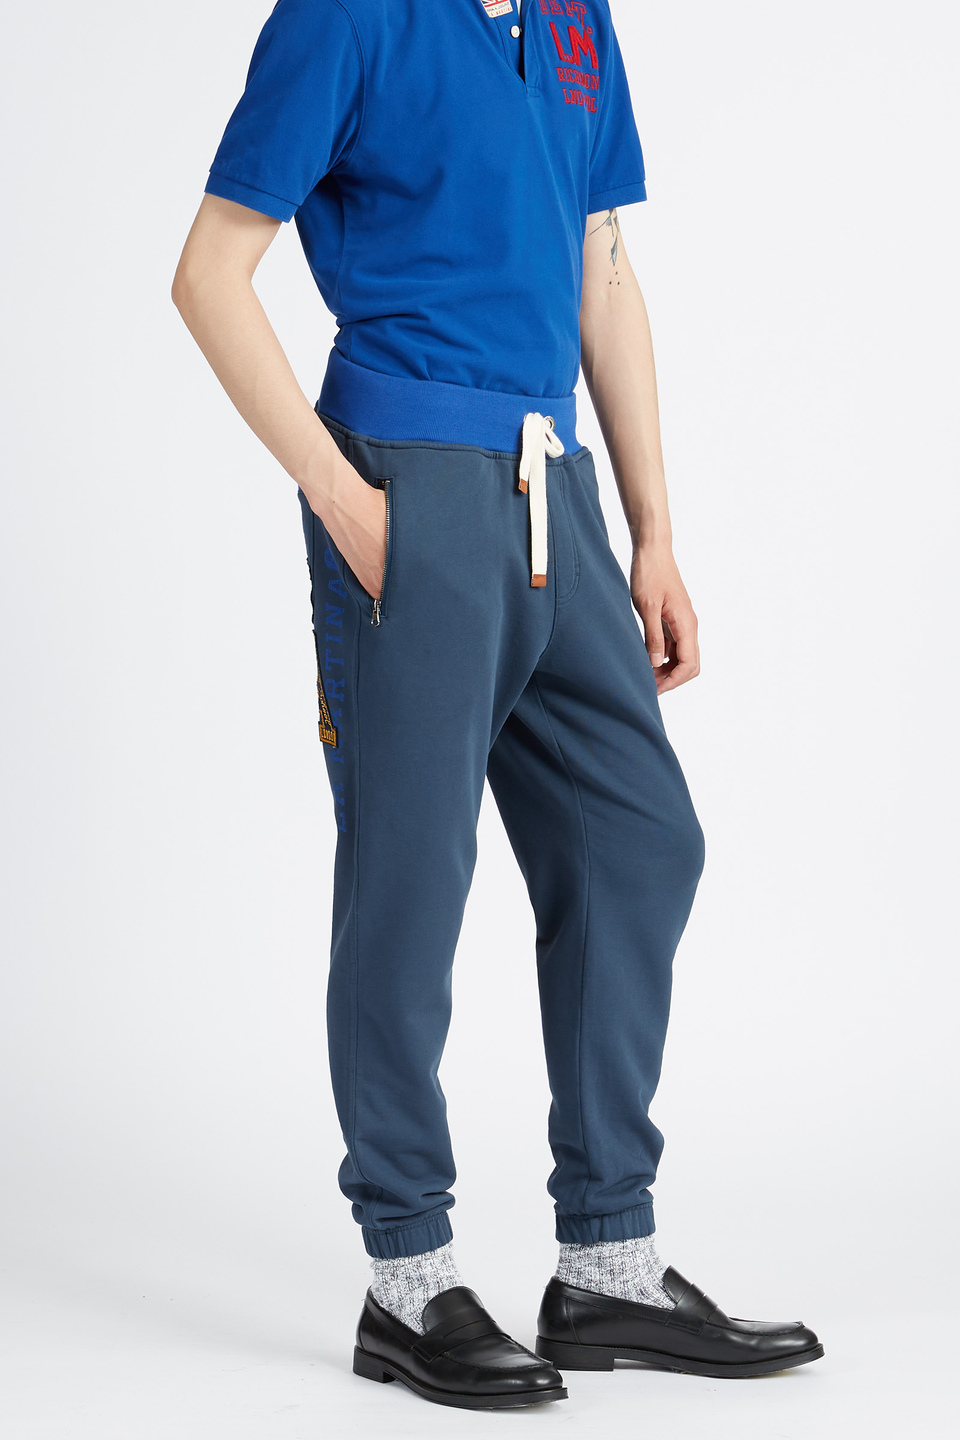 Men's cotton jogger trousers with drawstring and pockets Polo Academy - Vidor | La Martina - Official Online Shop